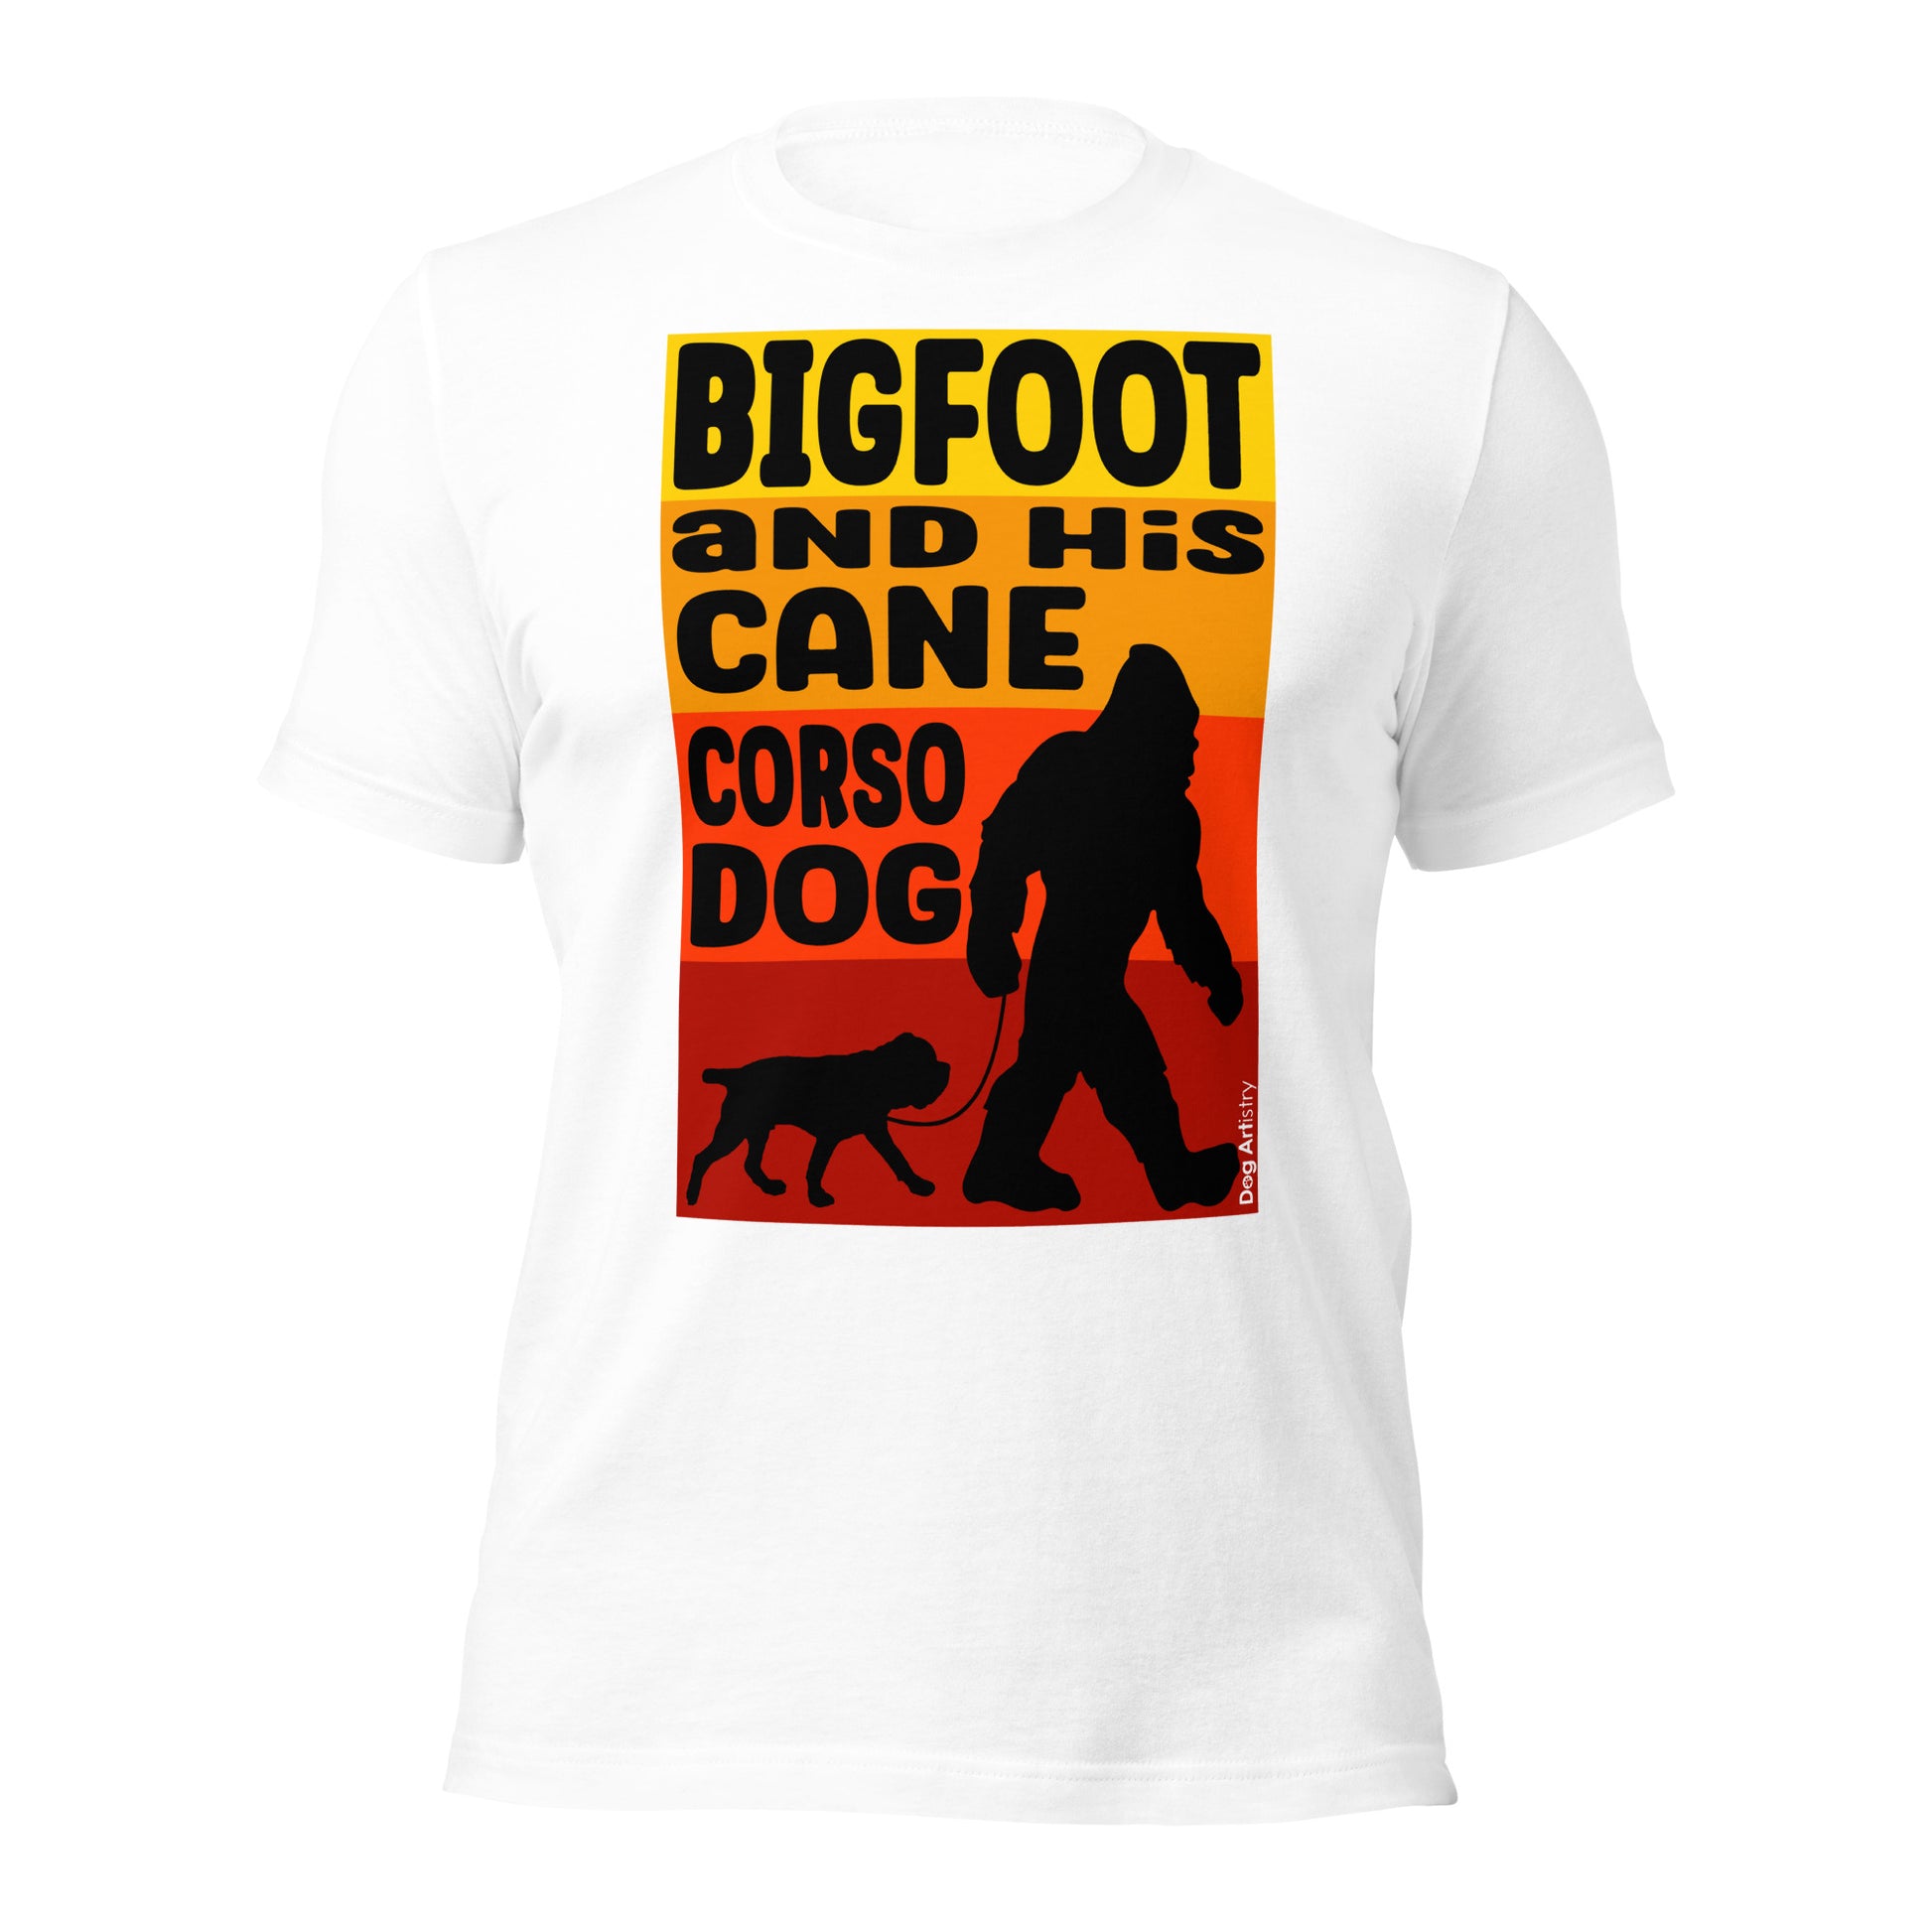 Big foot and his Cane Corso unisex white t-shirt by Dog Artistry.Big foot and his Cane Corso dog unisex white t-shirt by Dog Artistry.